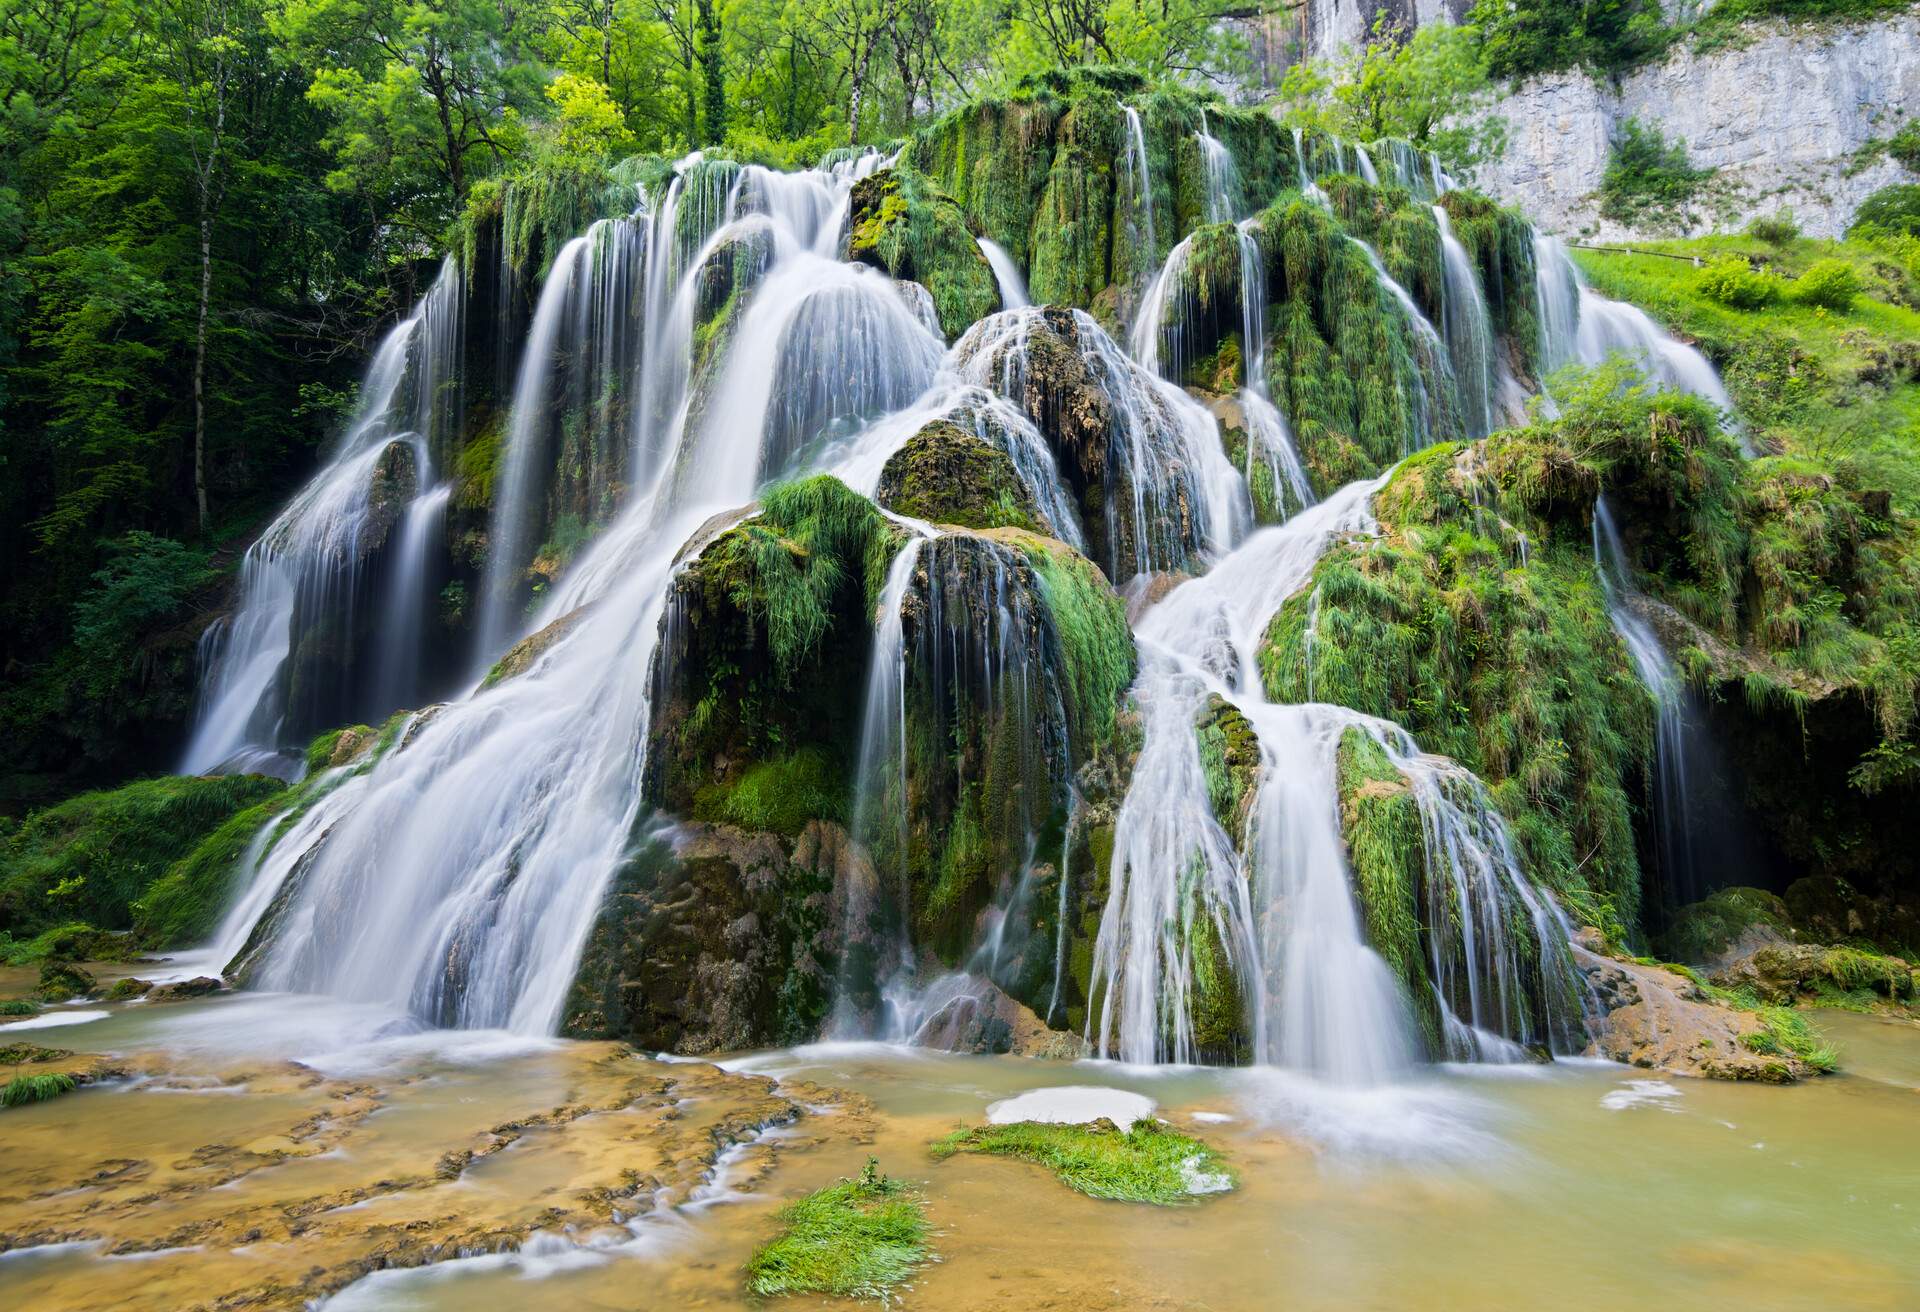 DEST_FRANCE_JURA_TUFS_WATERFALL_BAUME_LES_MESSIEURS_GettyImages-1200553974